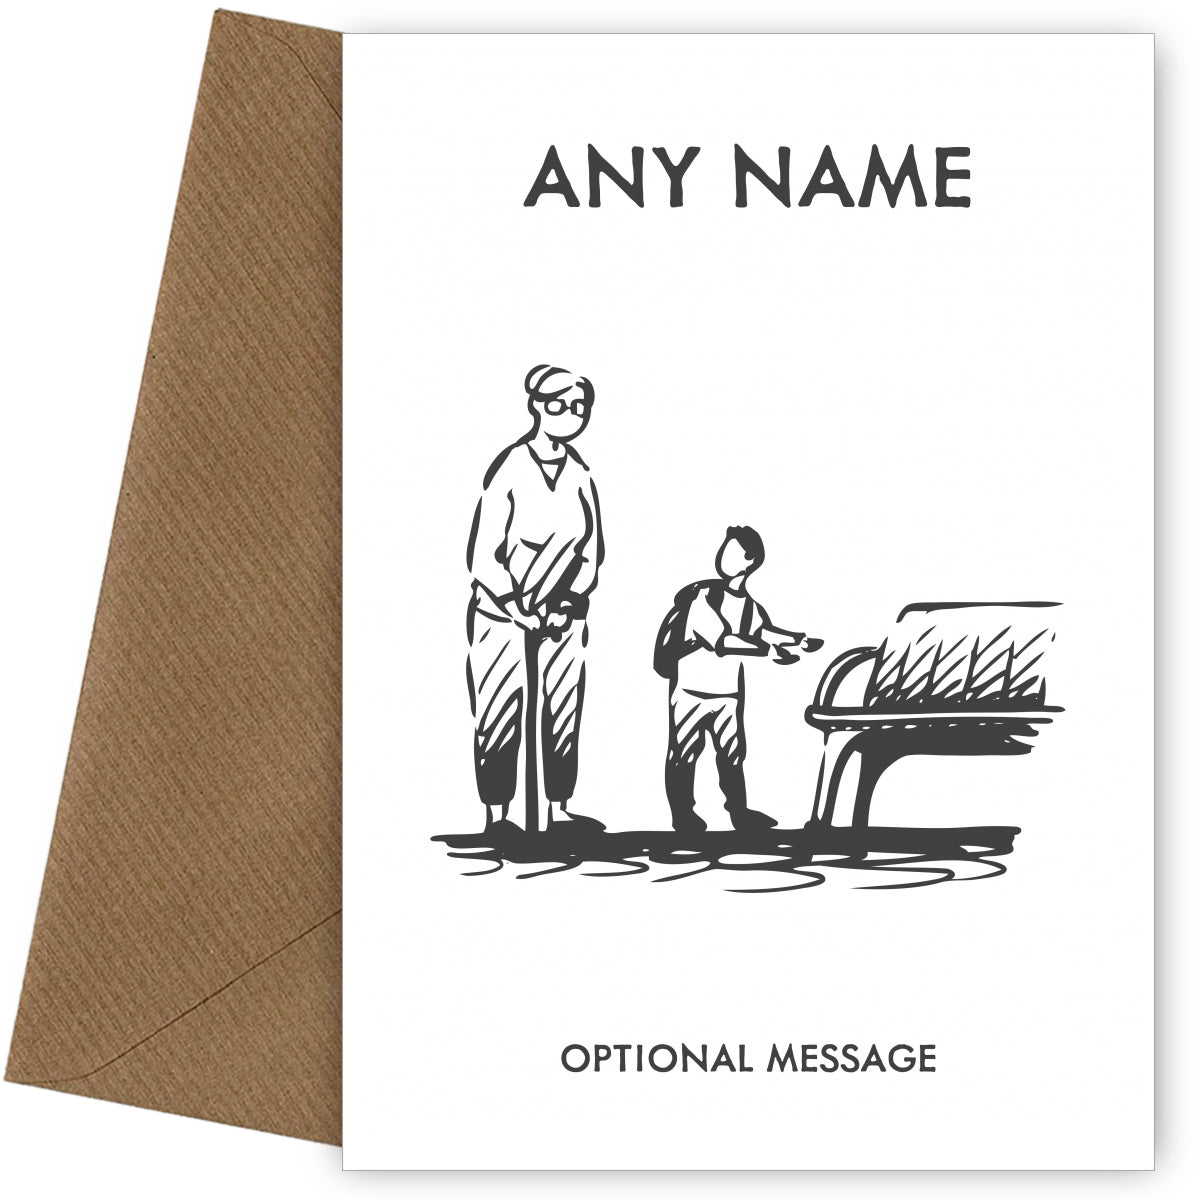 Nanny Greetings Card - Sit here with me